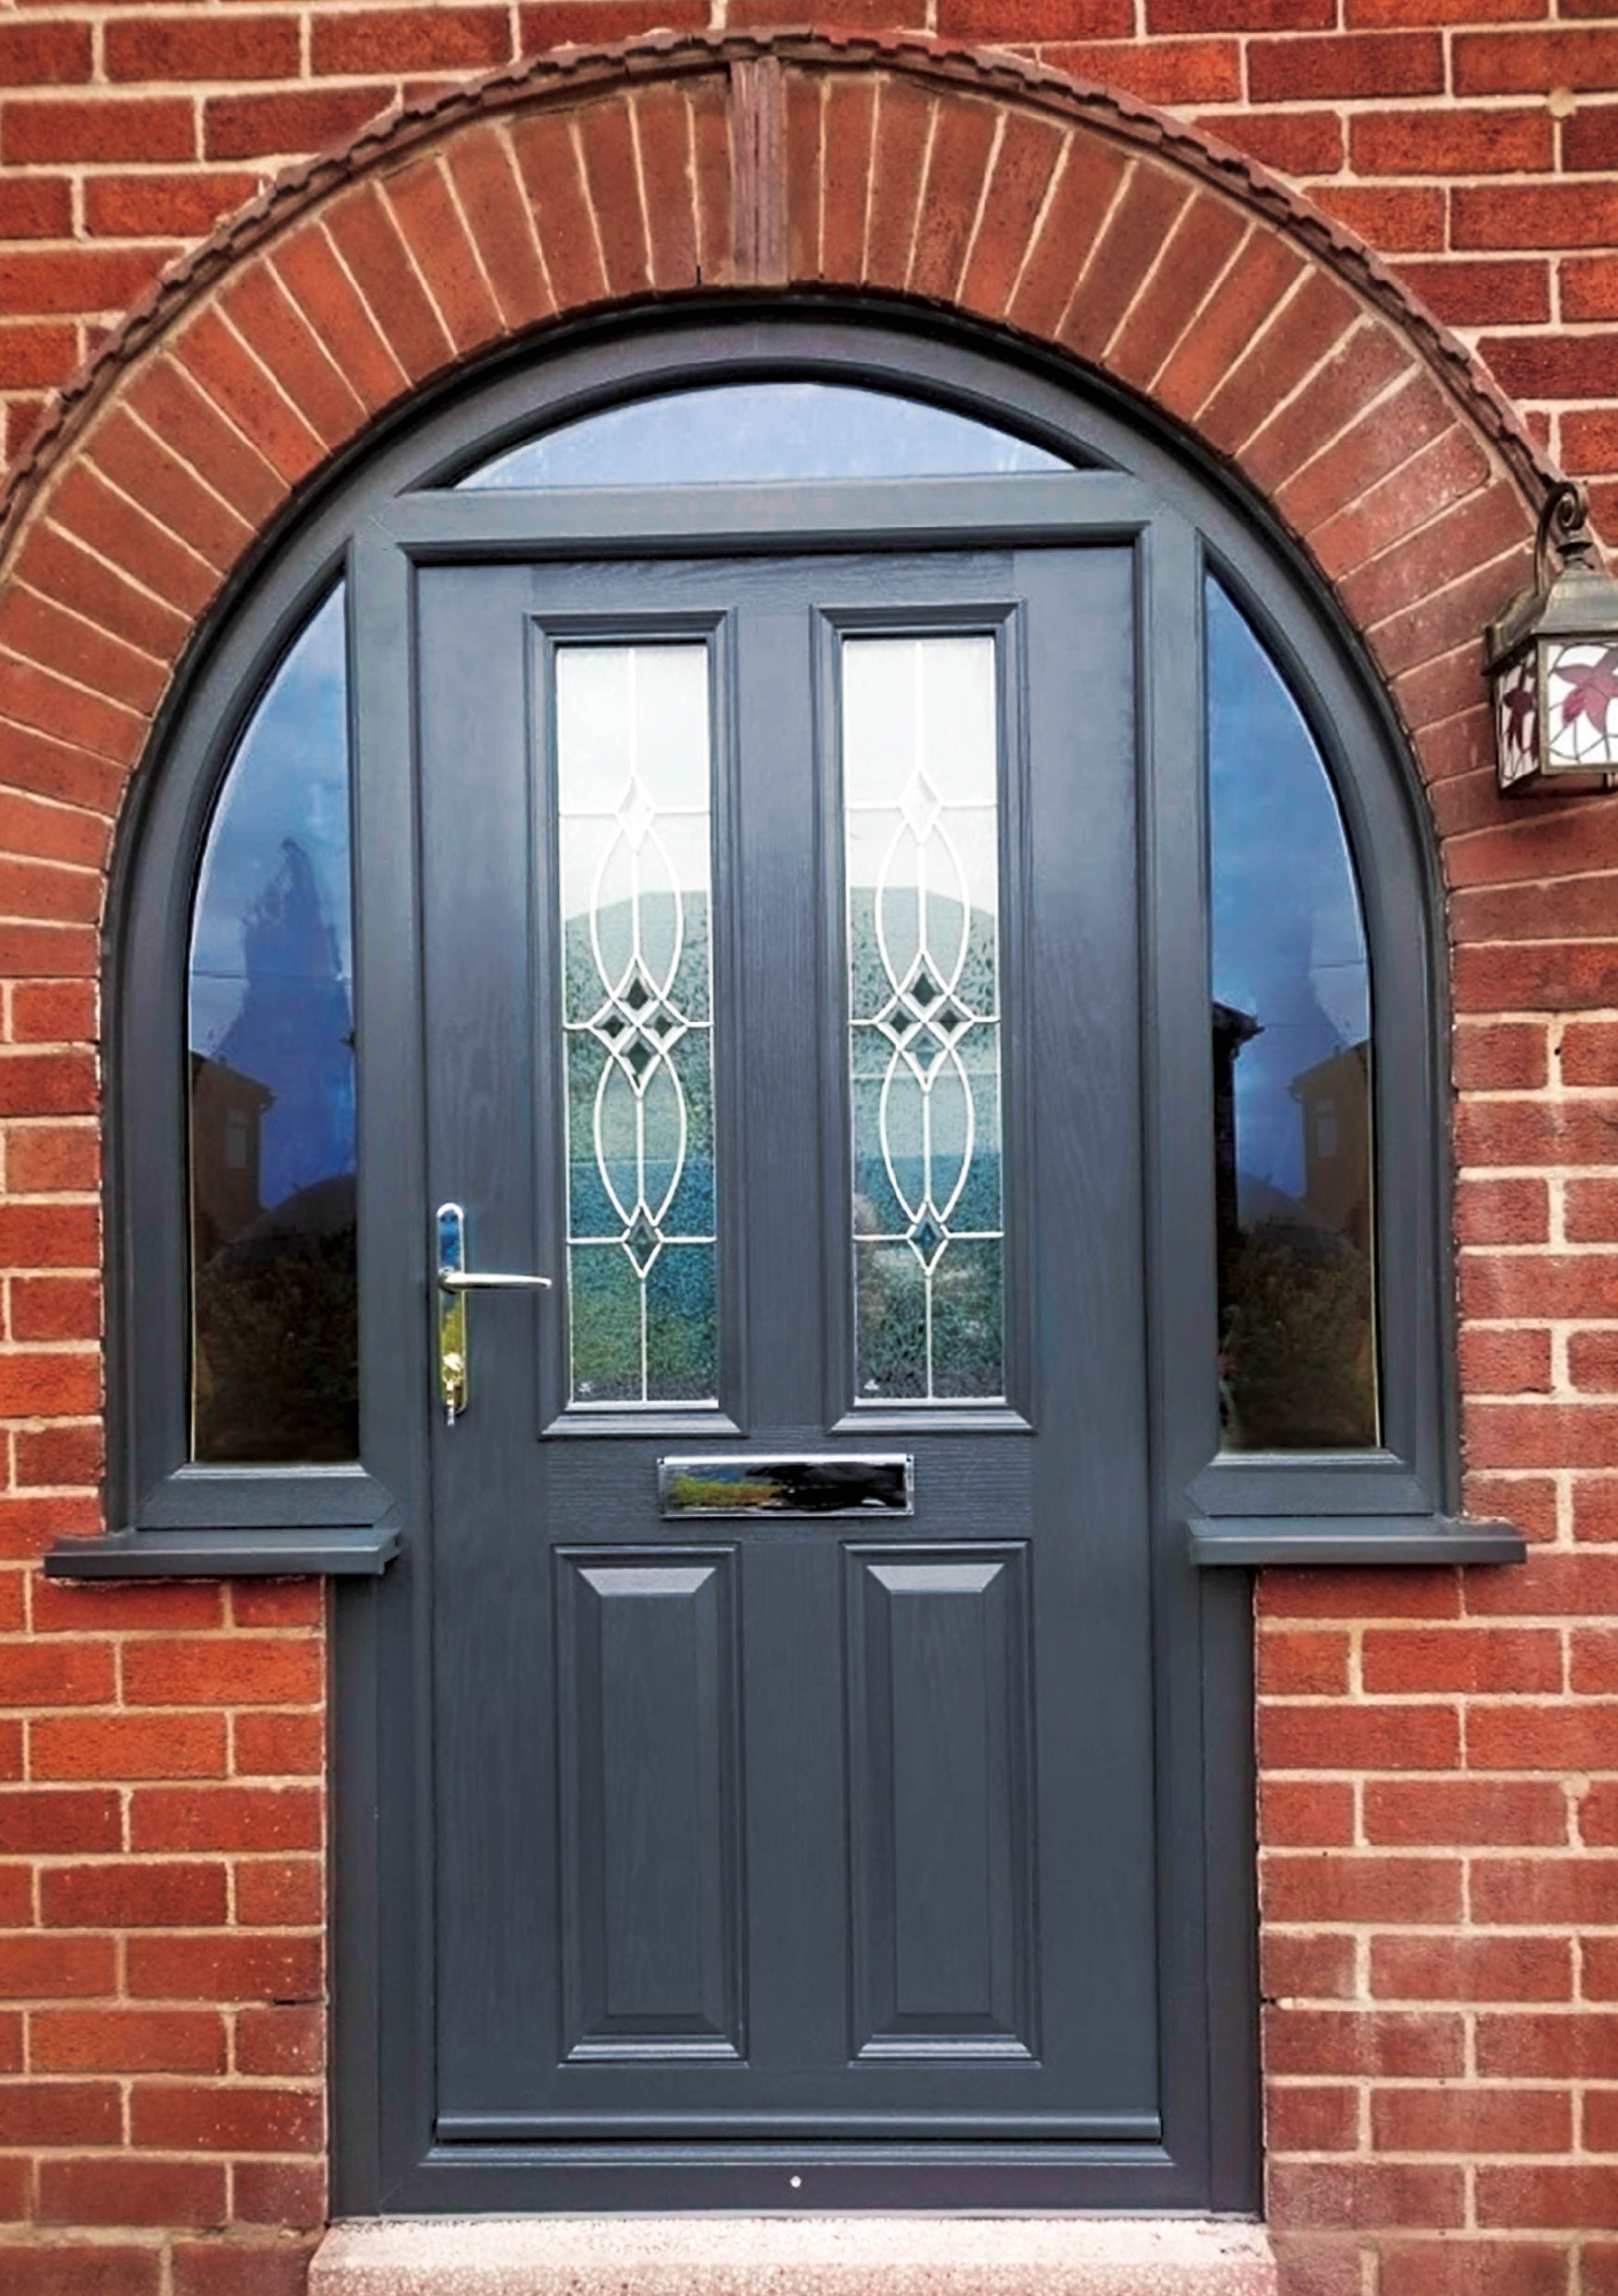 New Composite Door after being fitted by ArcOframe